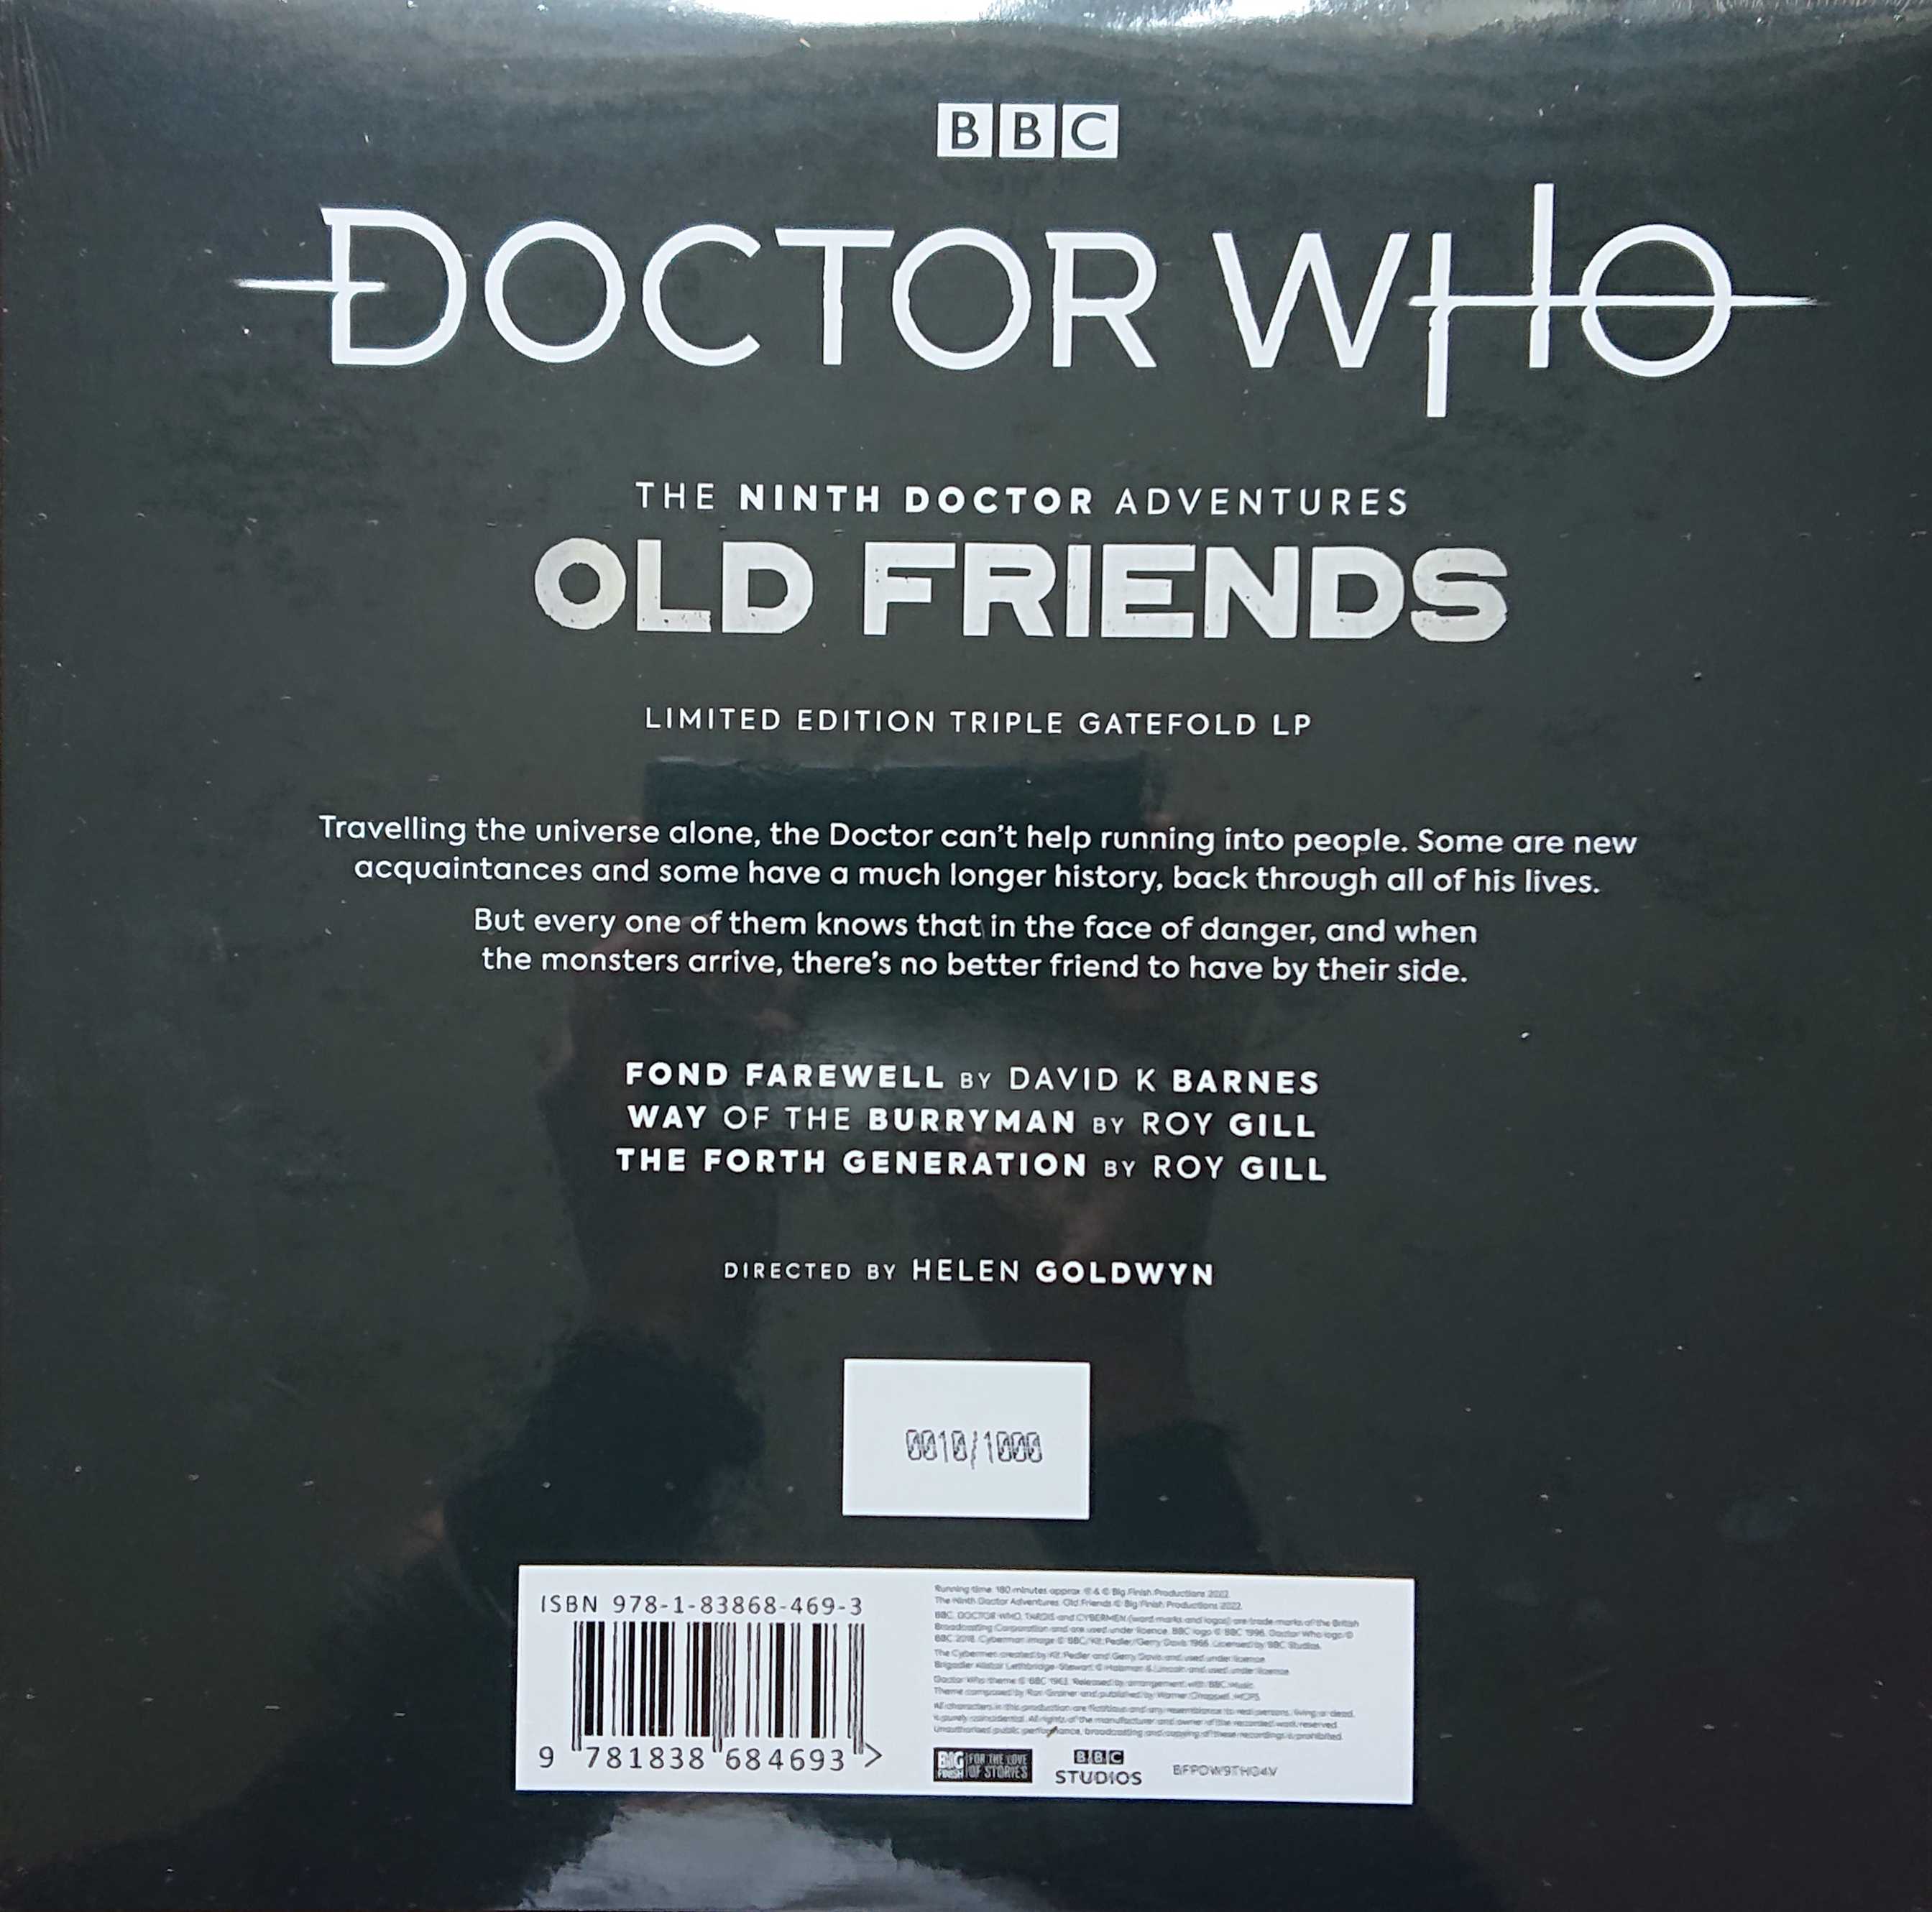 Picture of BFPDW9TH04V Doctor Who - The Ninth Doctor Adventures - Old friends by artist David K Barnes / Roy Gill from the BBC records and Tapes library